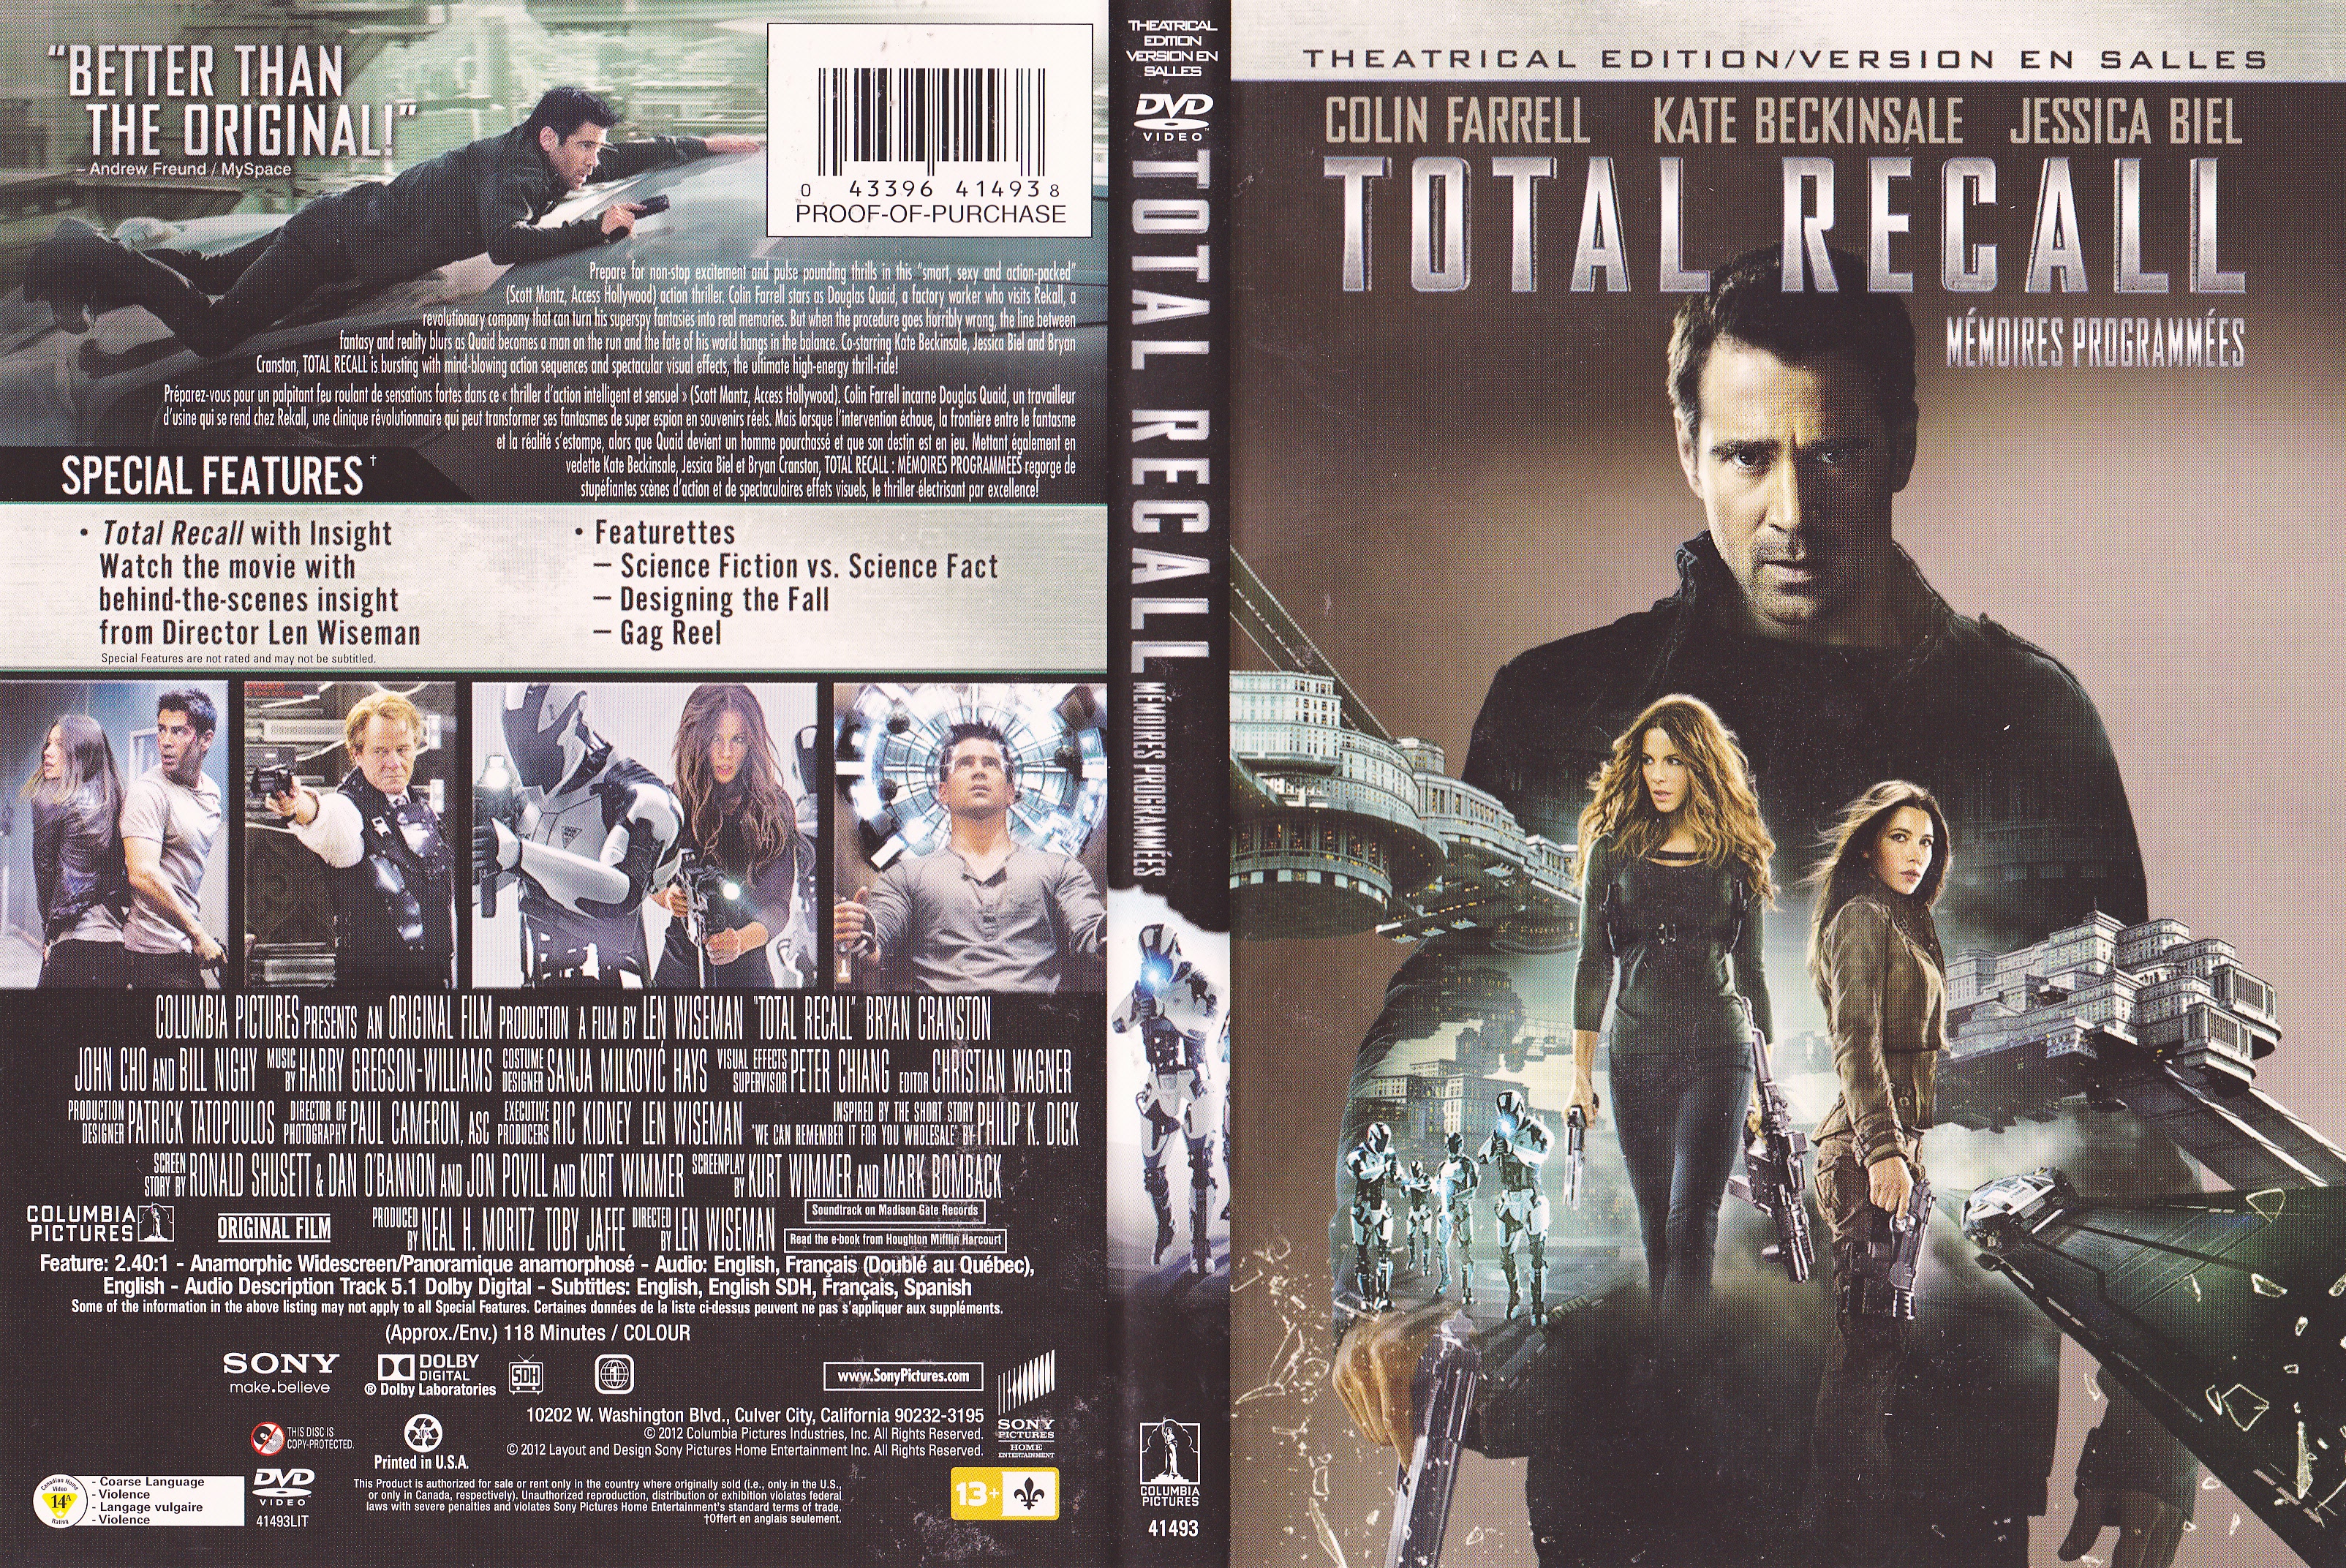 Jaquette DVD Total recall Mmoire programmes (Canadienne)